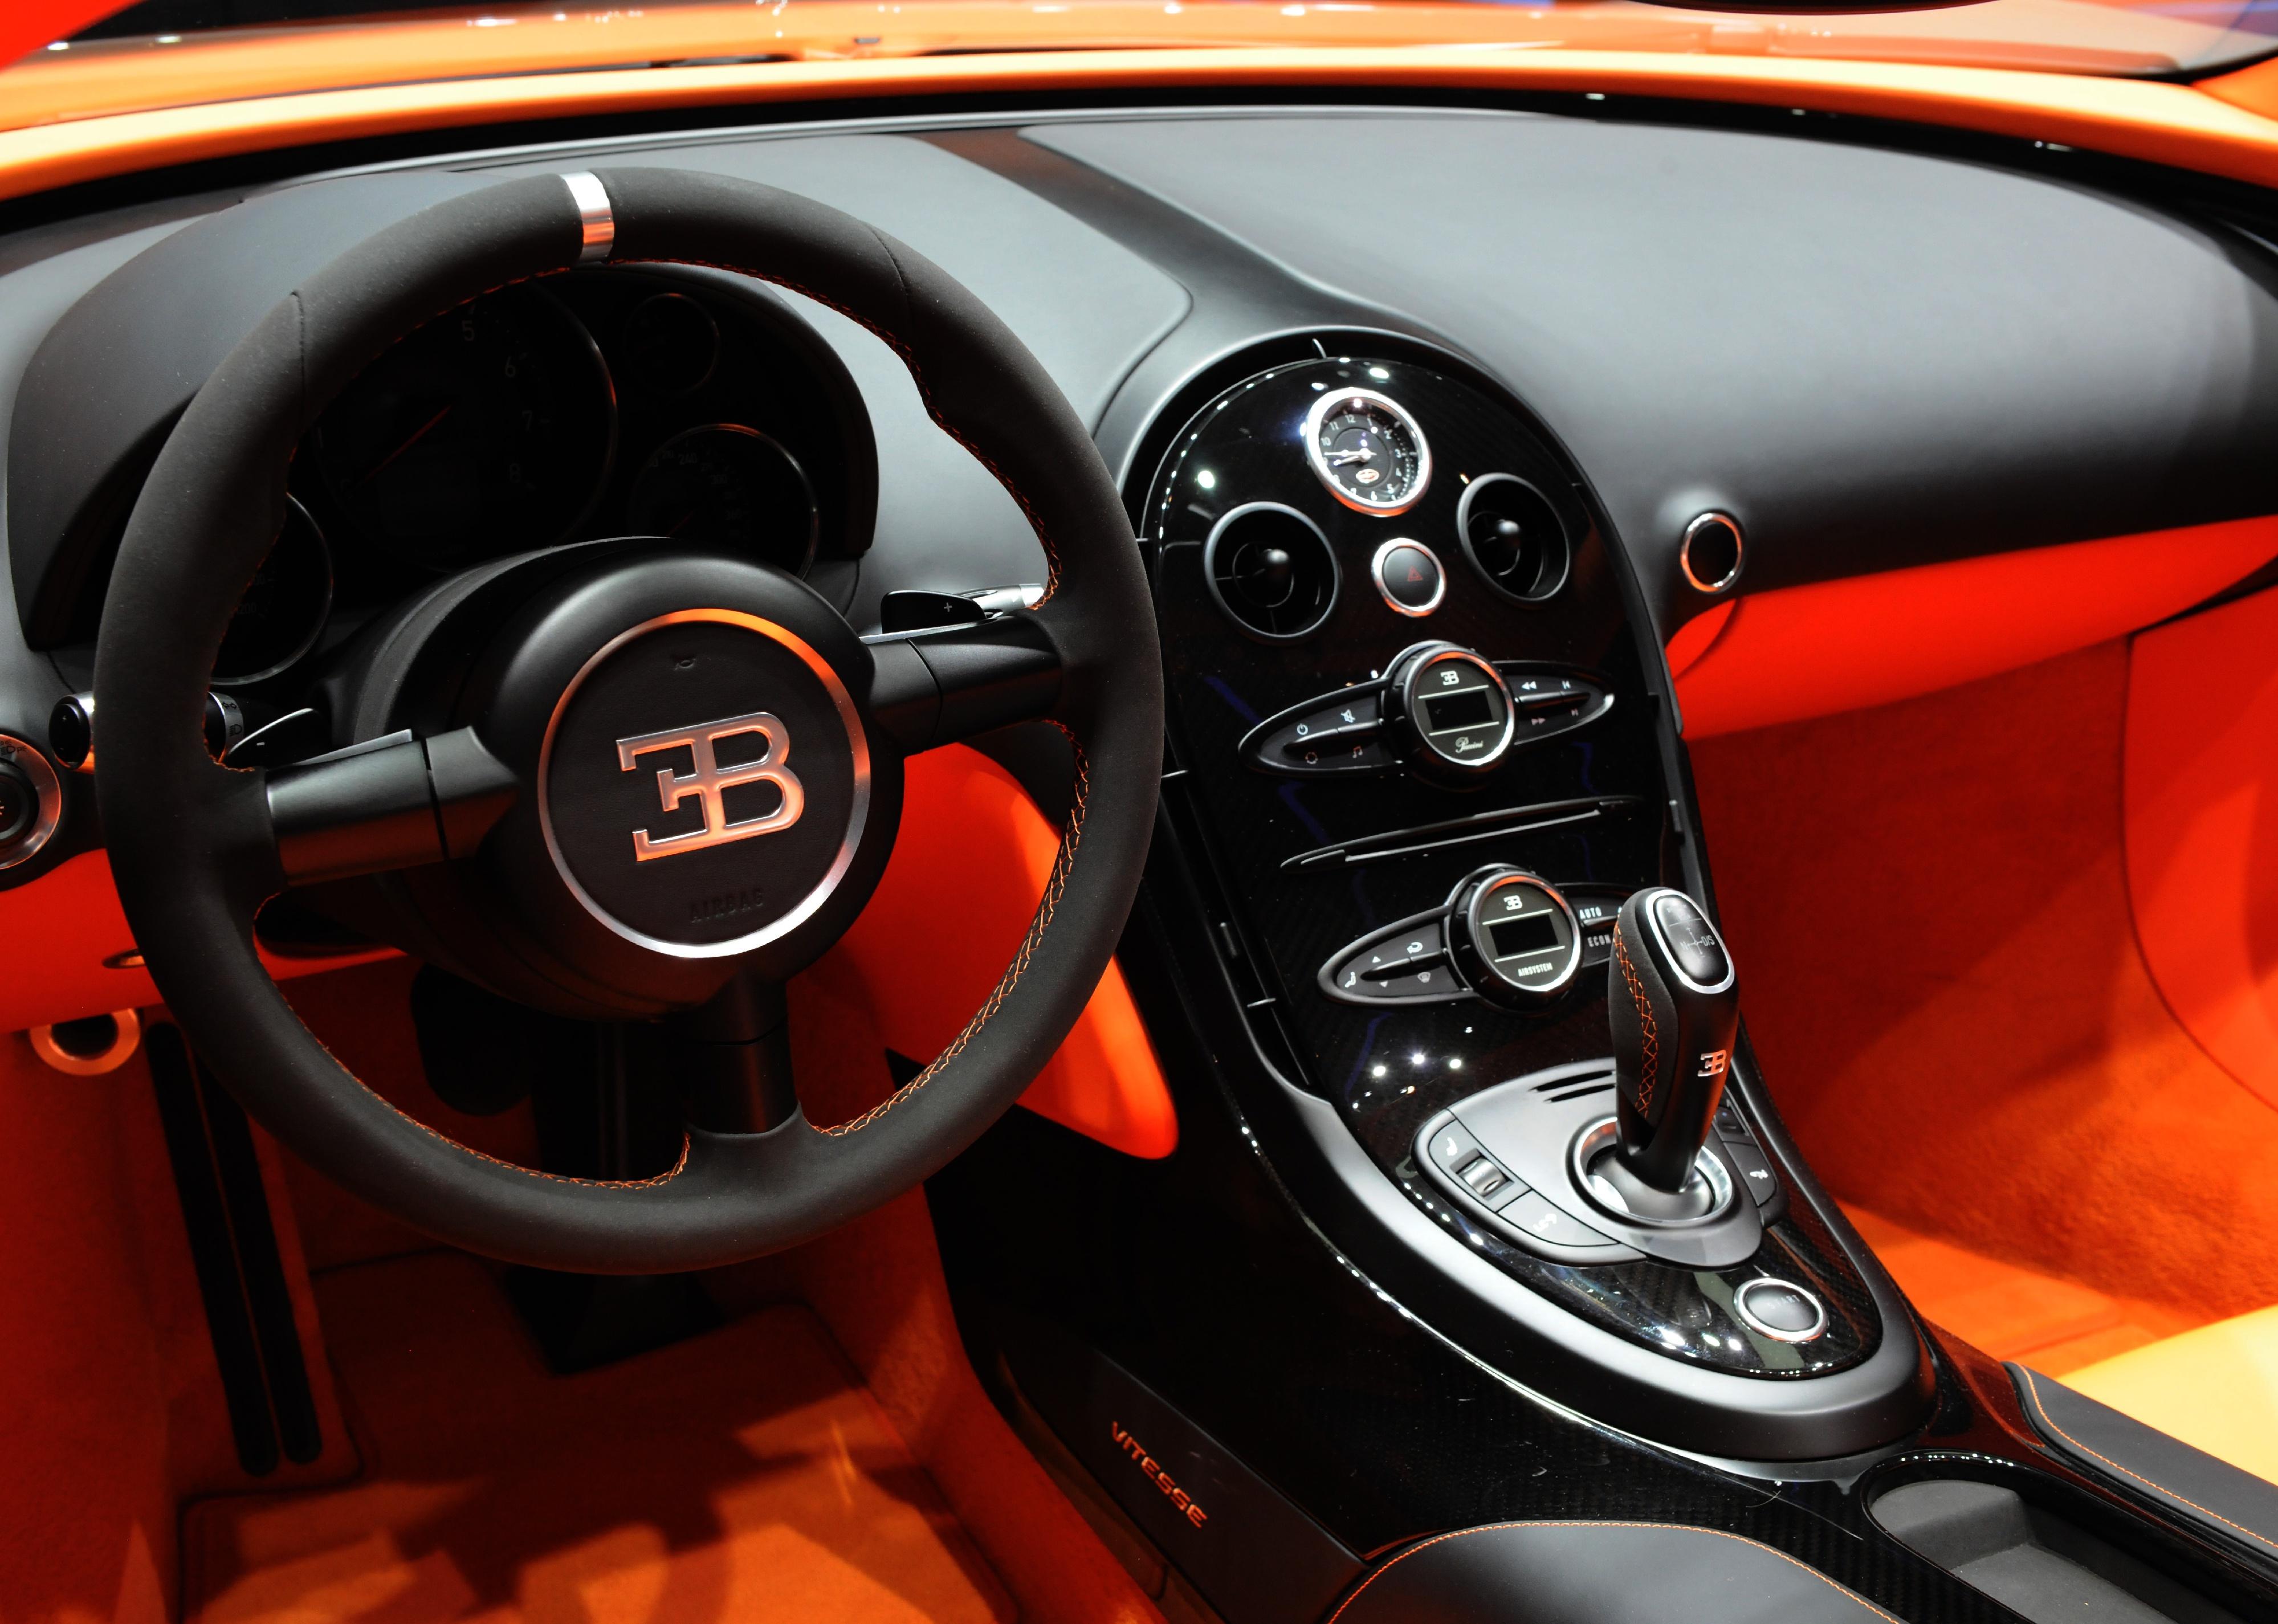 A view of the interior of a Bugatti Veyron shown on the Bugatti stand at the Geneva Motor Show.